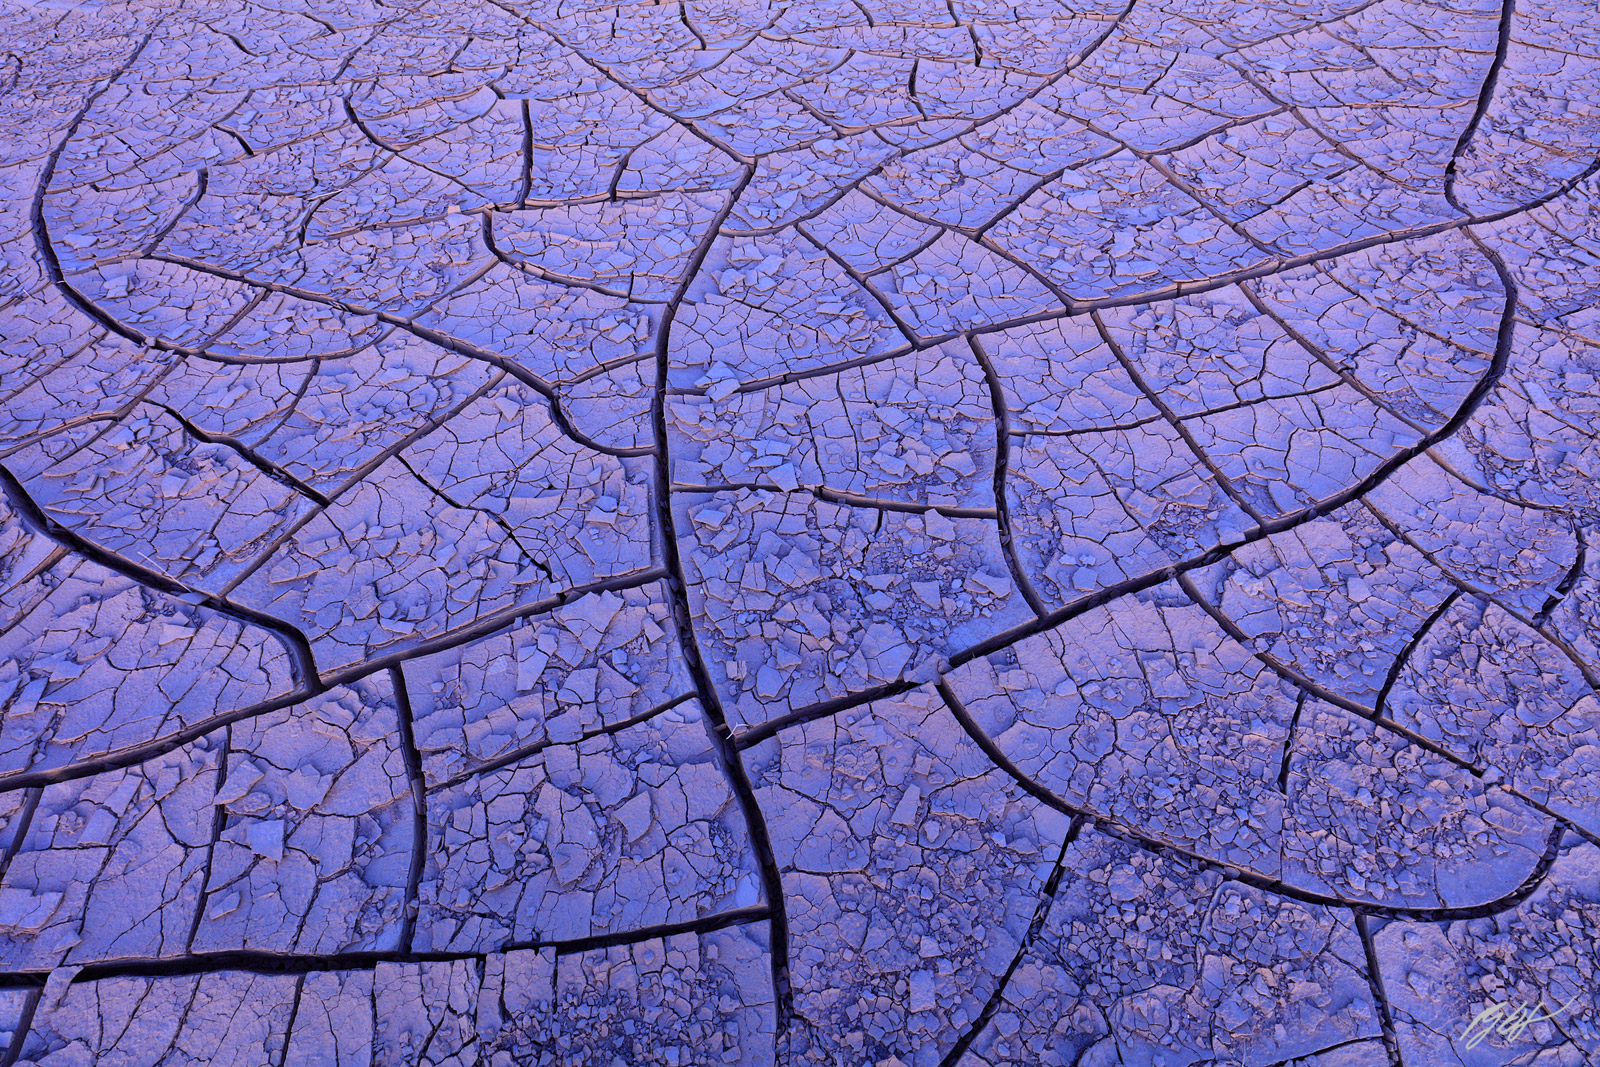 Mud Tiles in Death Valley National Park in California